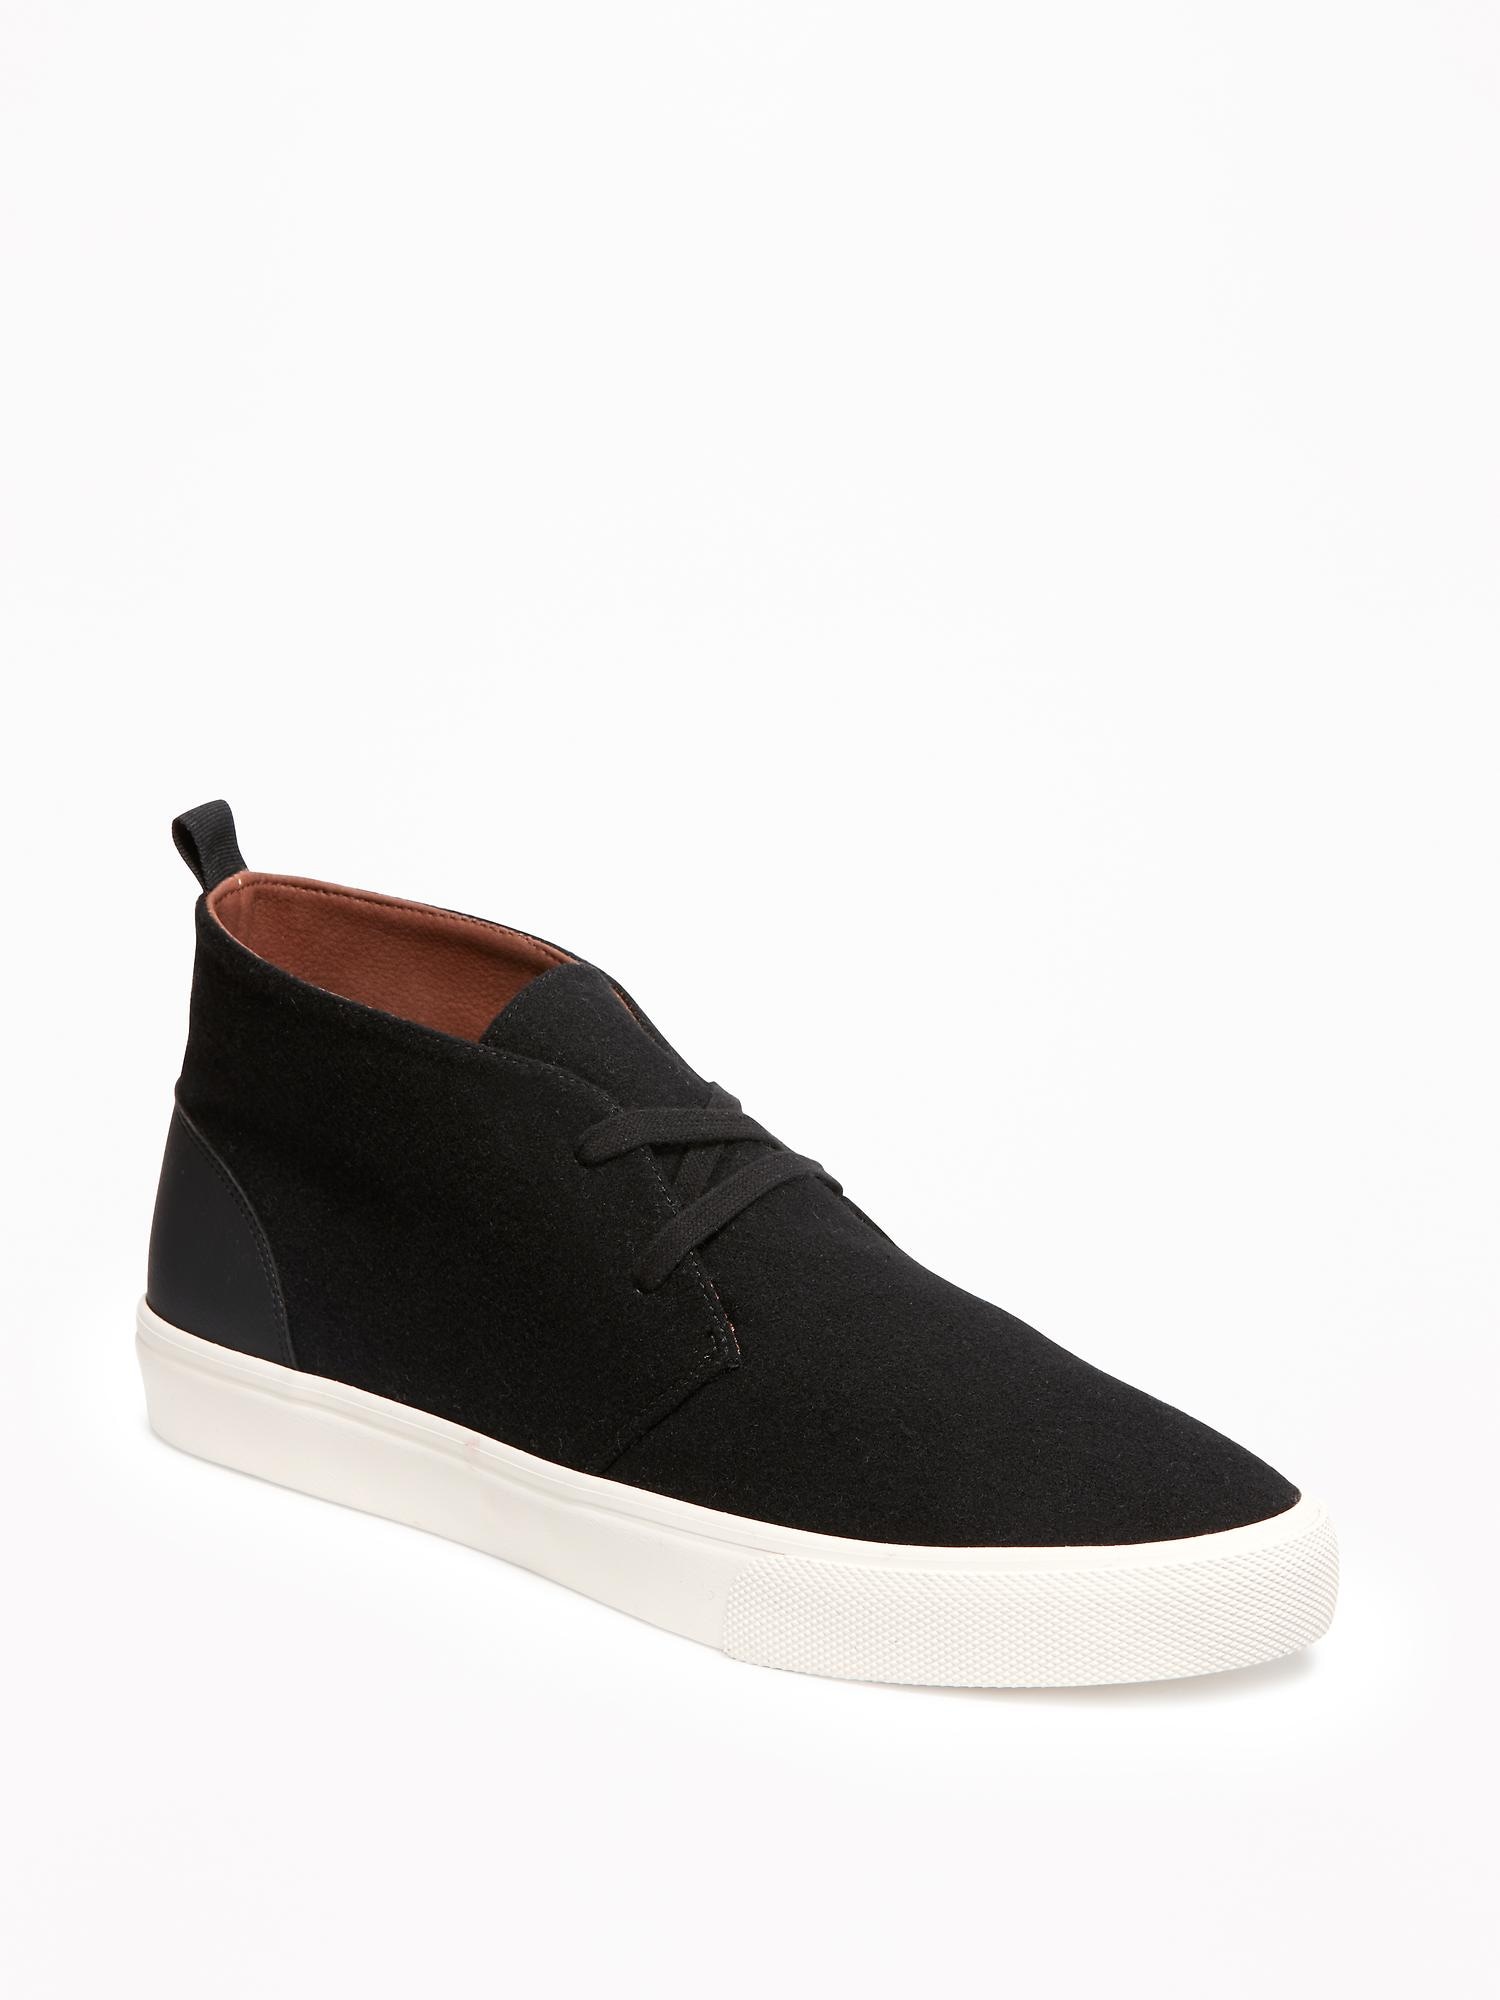 Wool-Blend Chukka Sneakers for Men | Old Navy